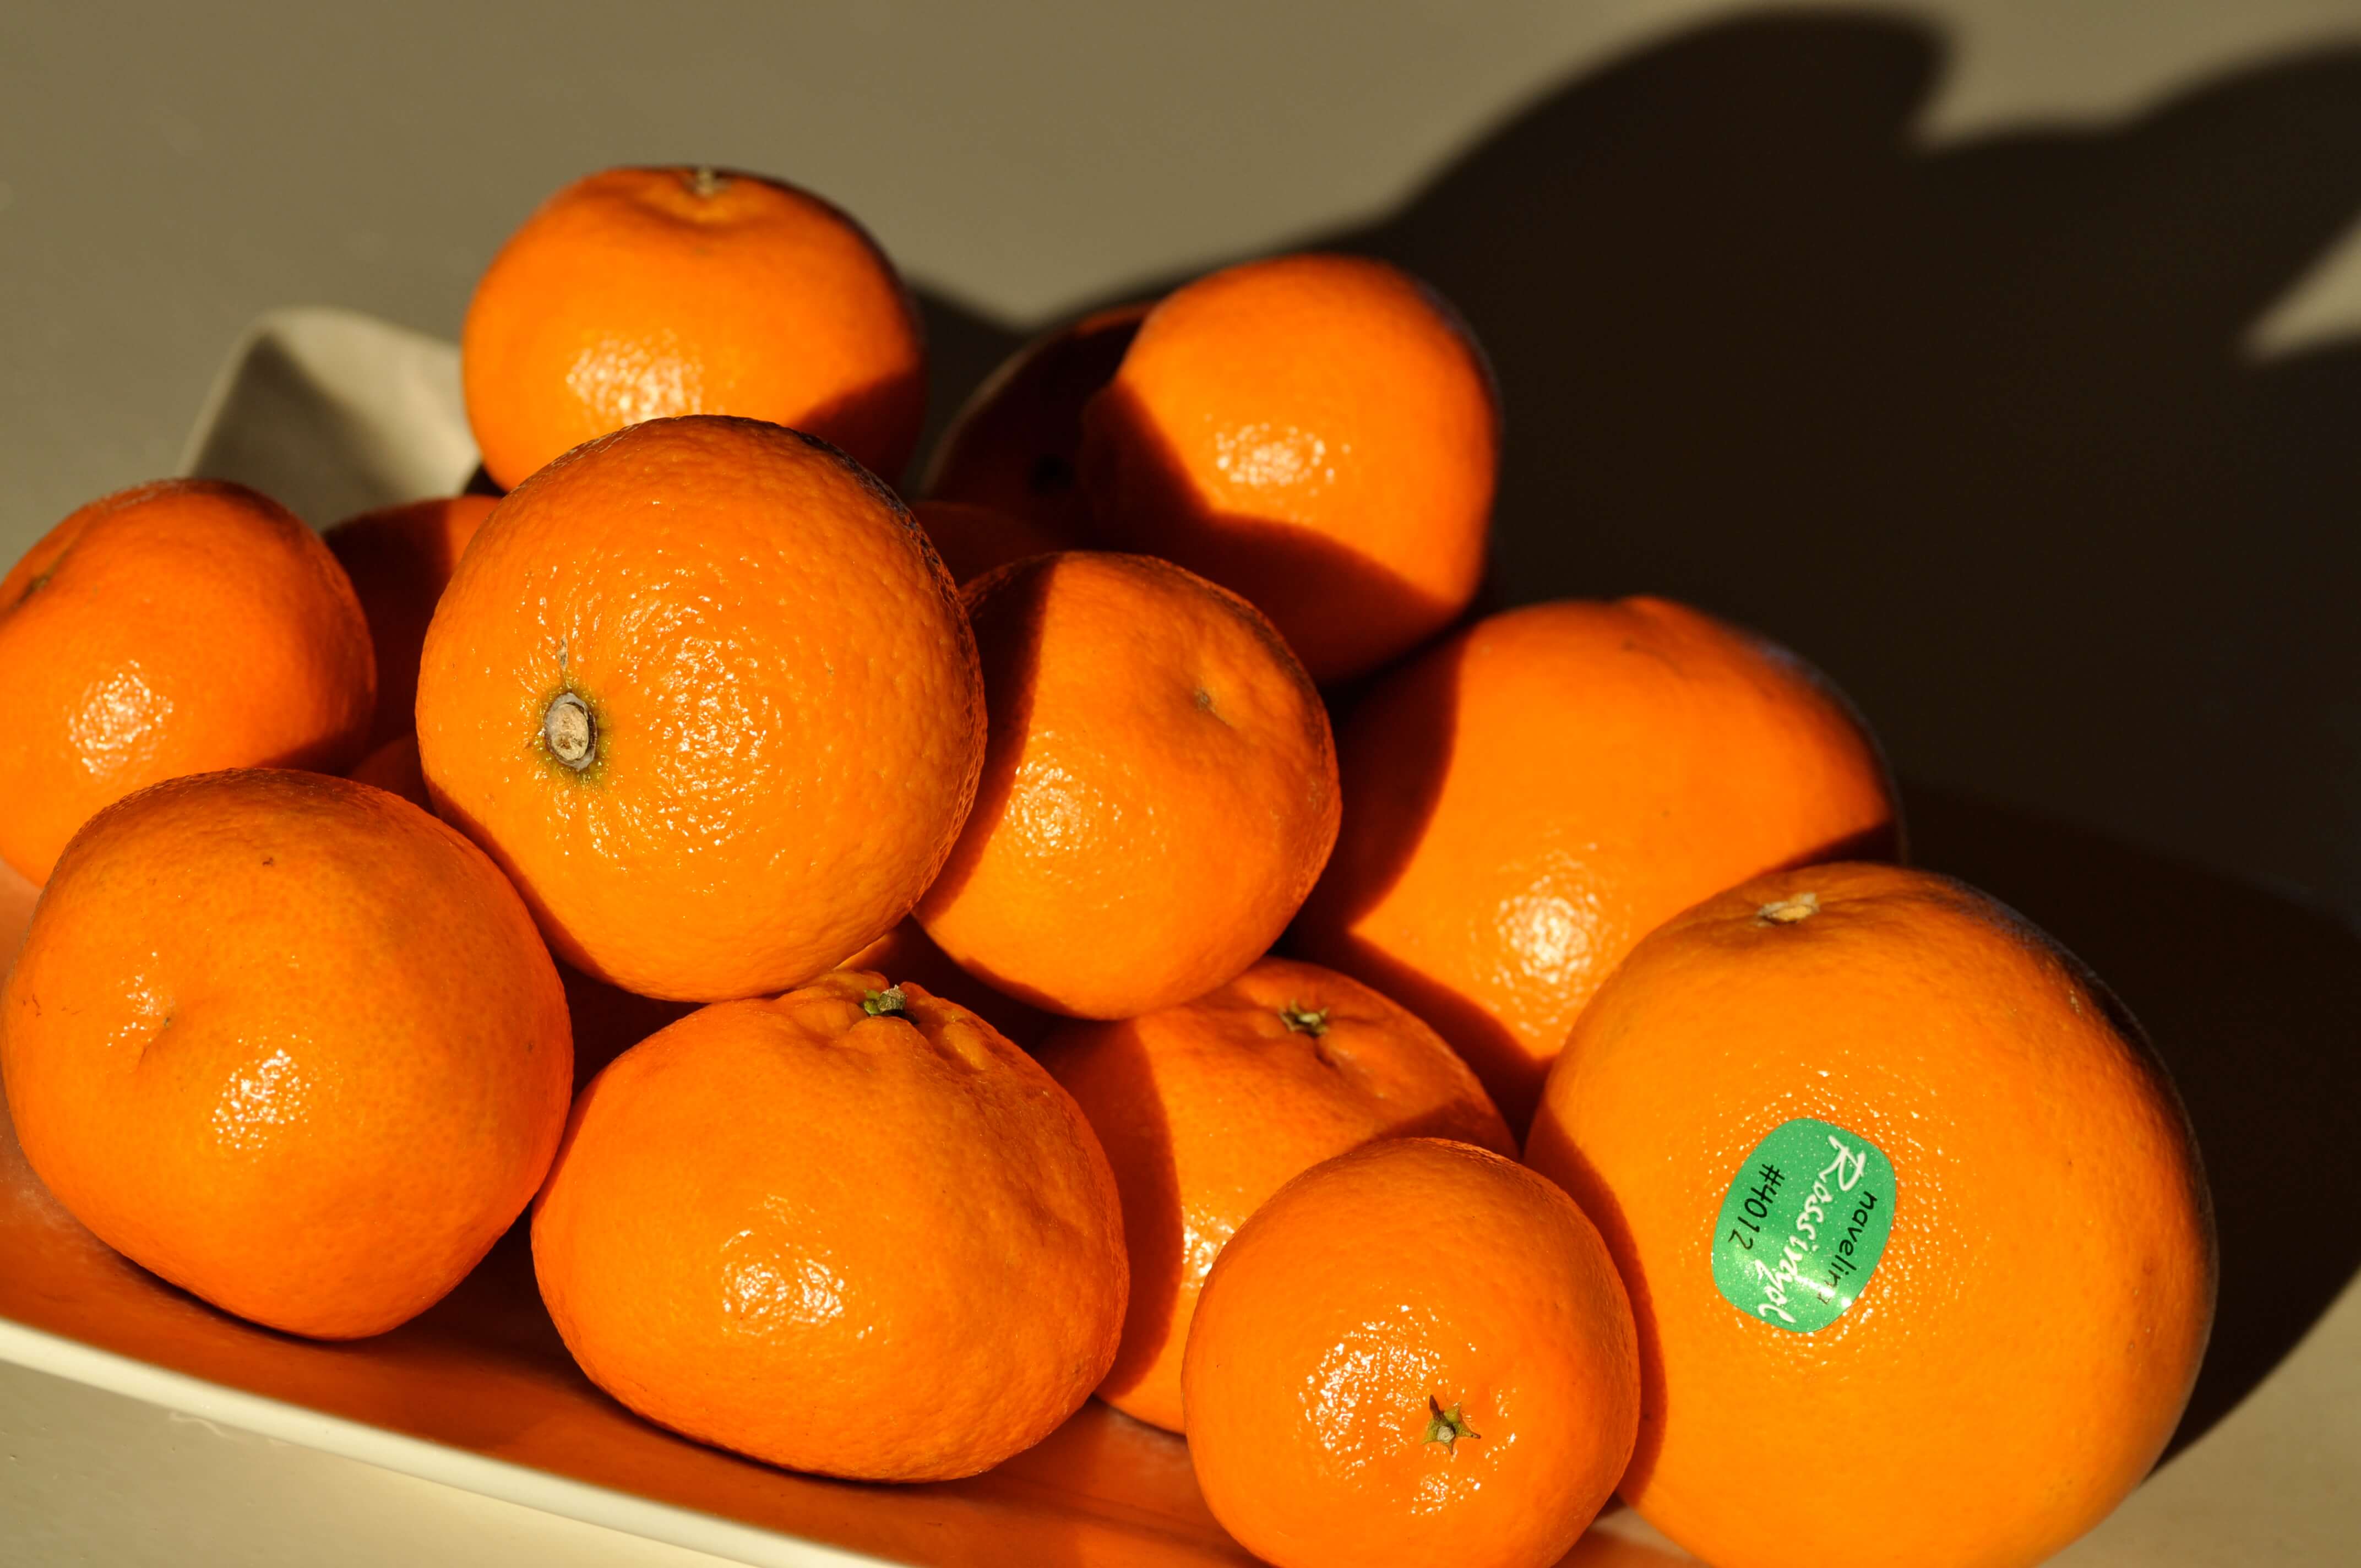 A plate of clementines sit on a table in the sun (April 2020)